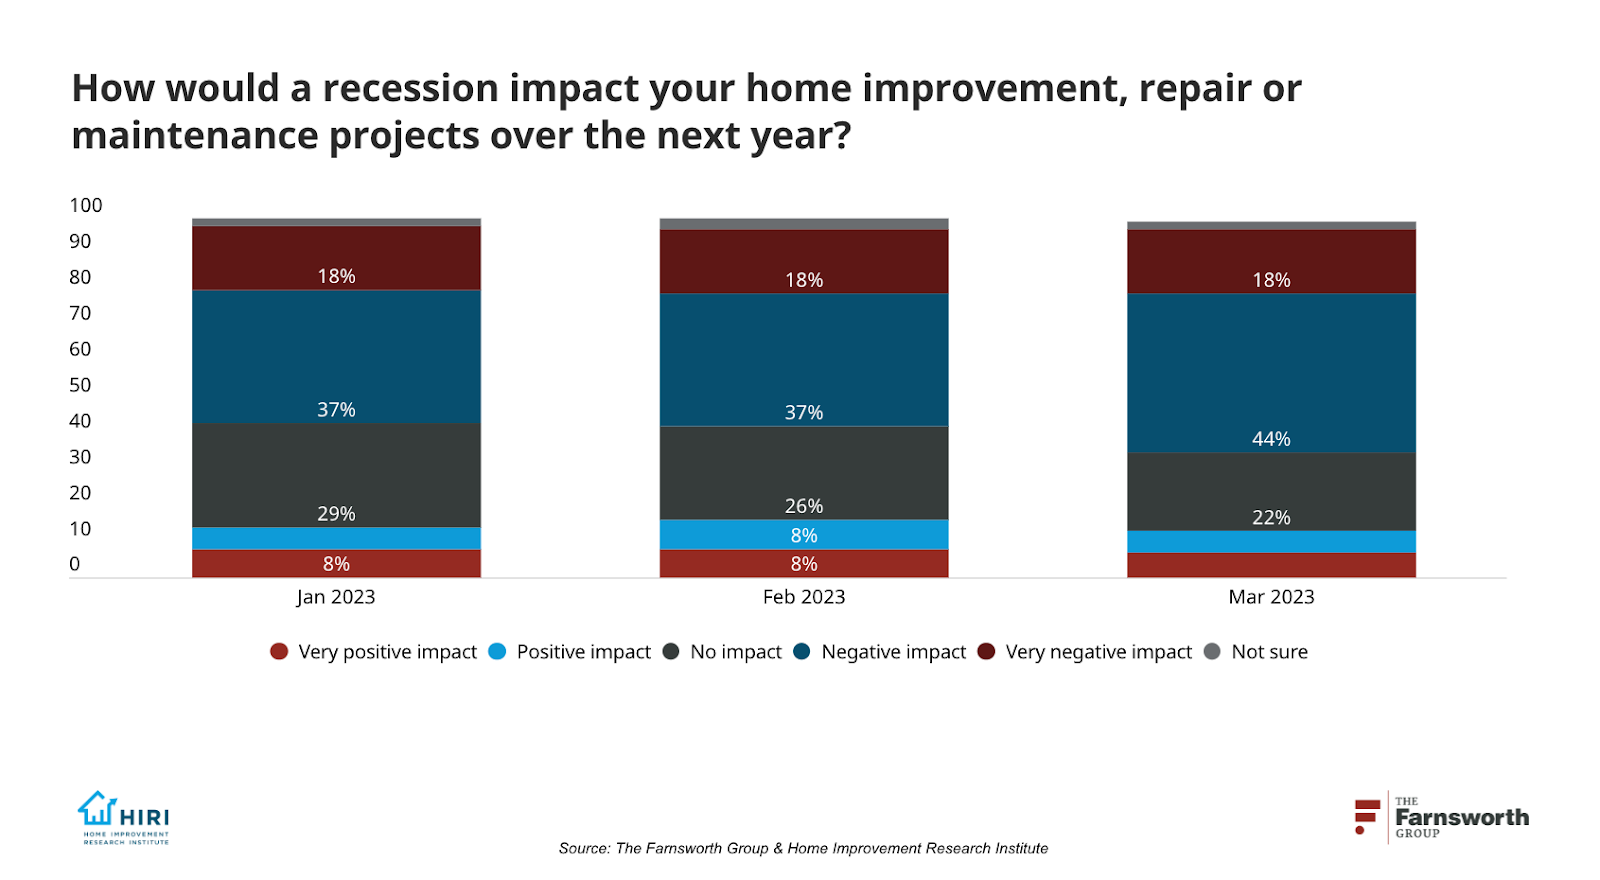 How would a recession impact your home improvement, repair or maintenance projects over the next year?